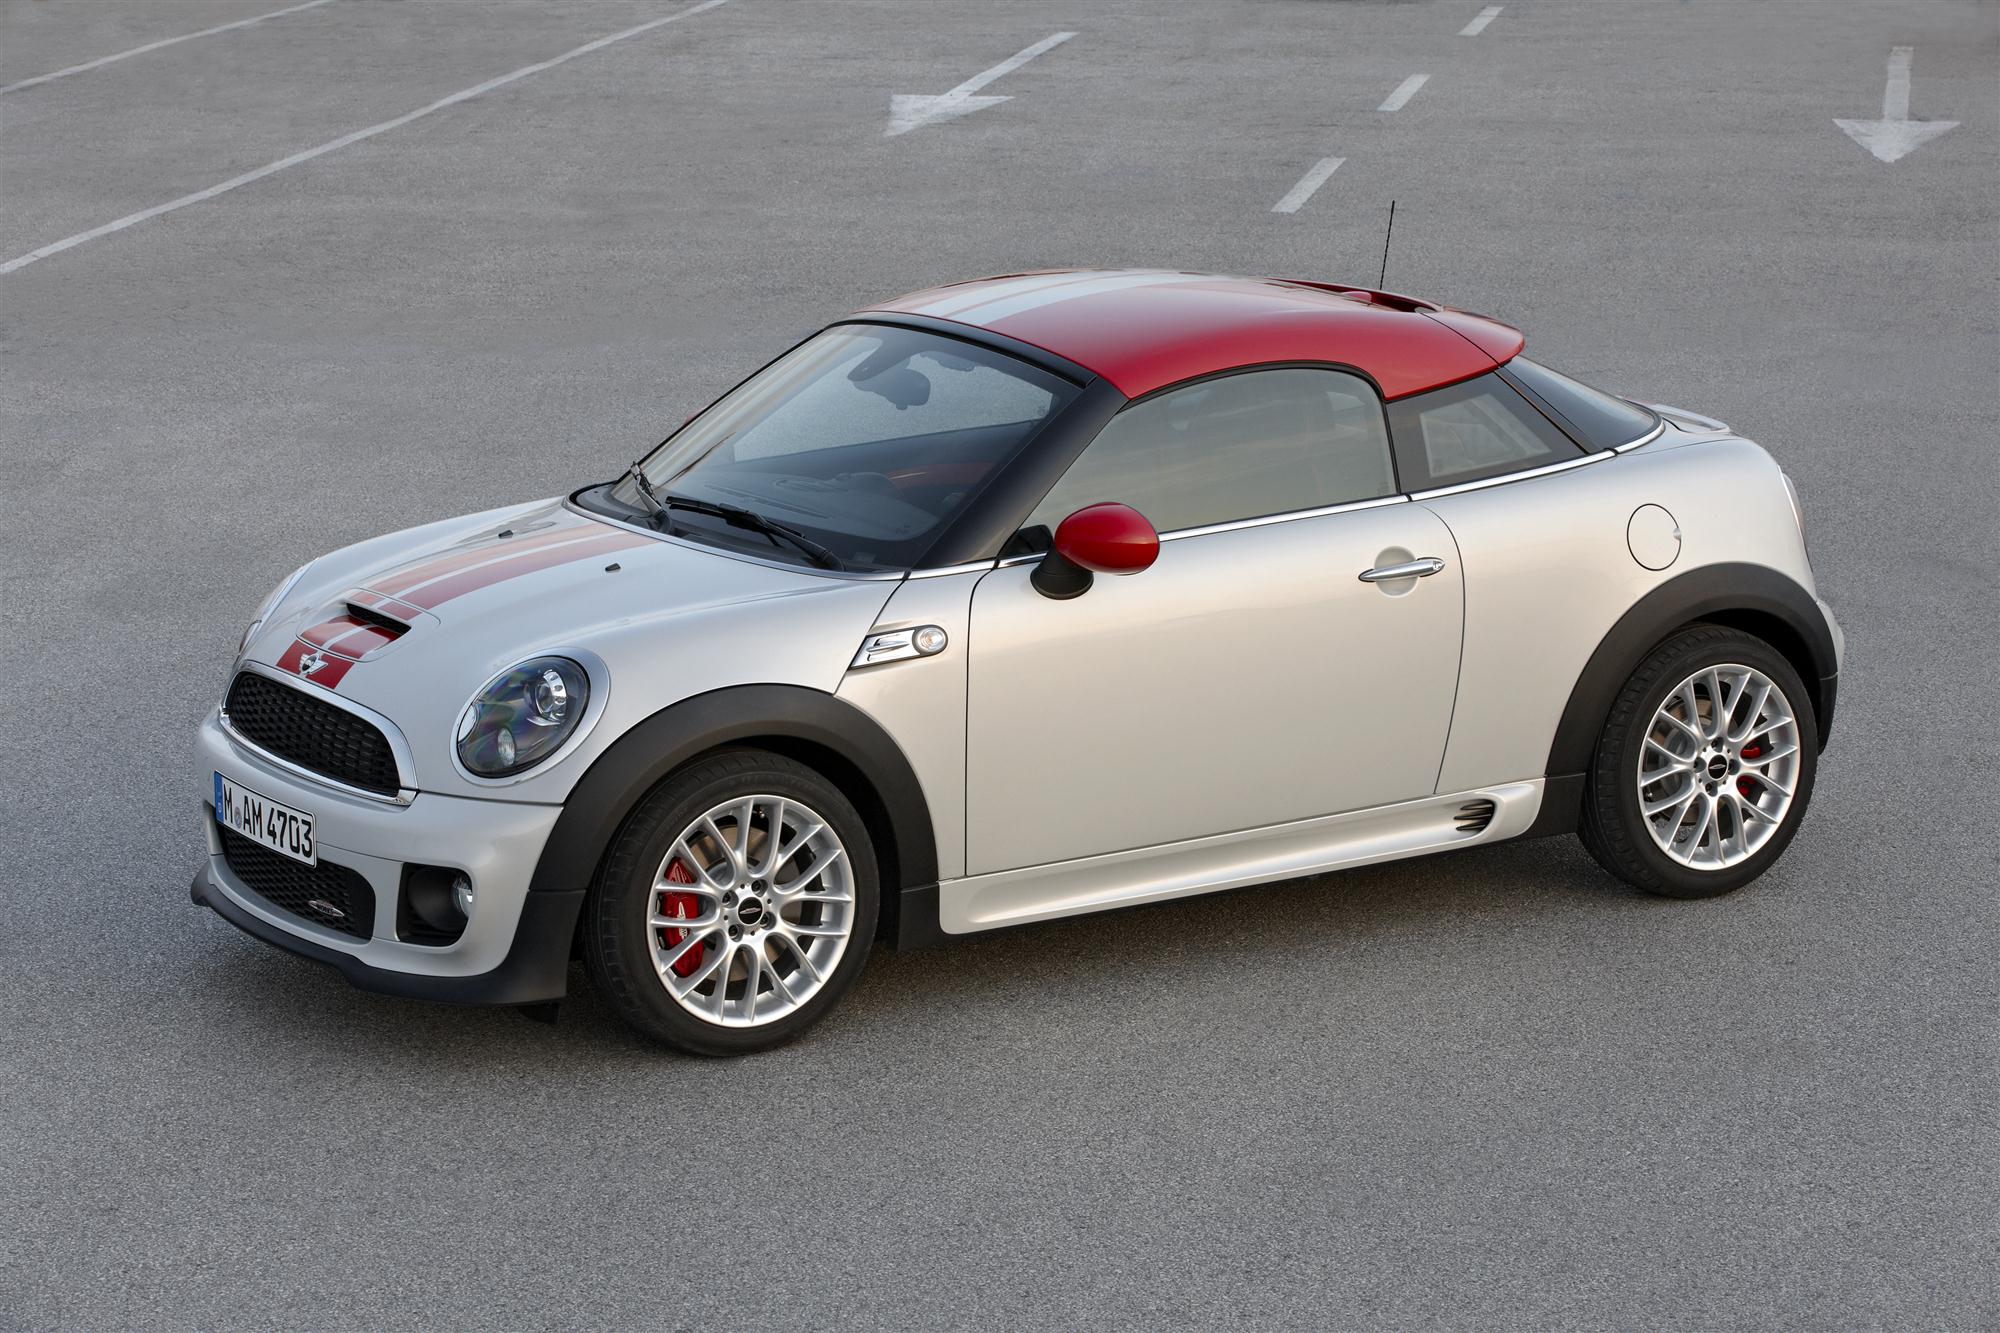 2012 MINI Coupe Preview: Cooper, Cooper S, And John Cooper Works Models